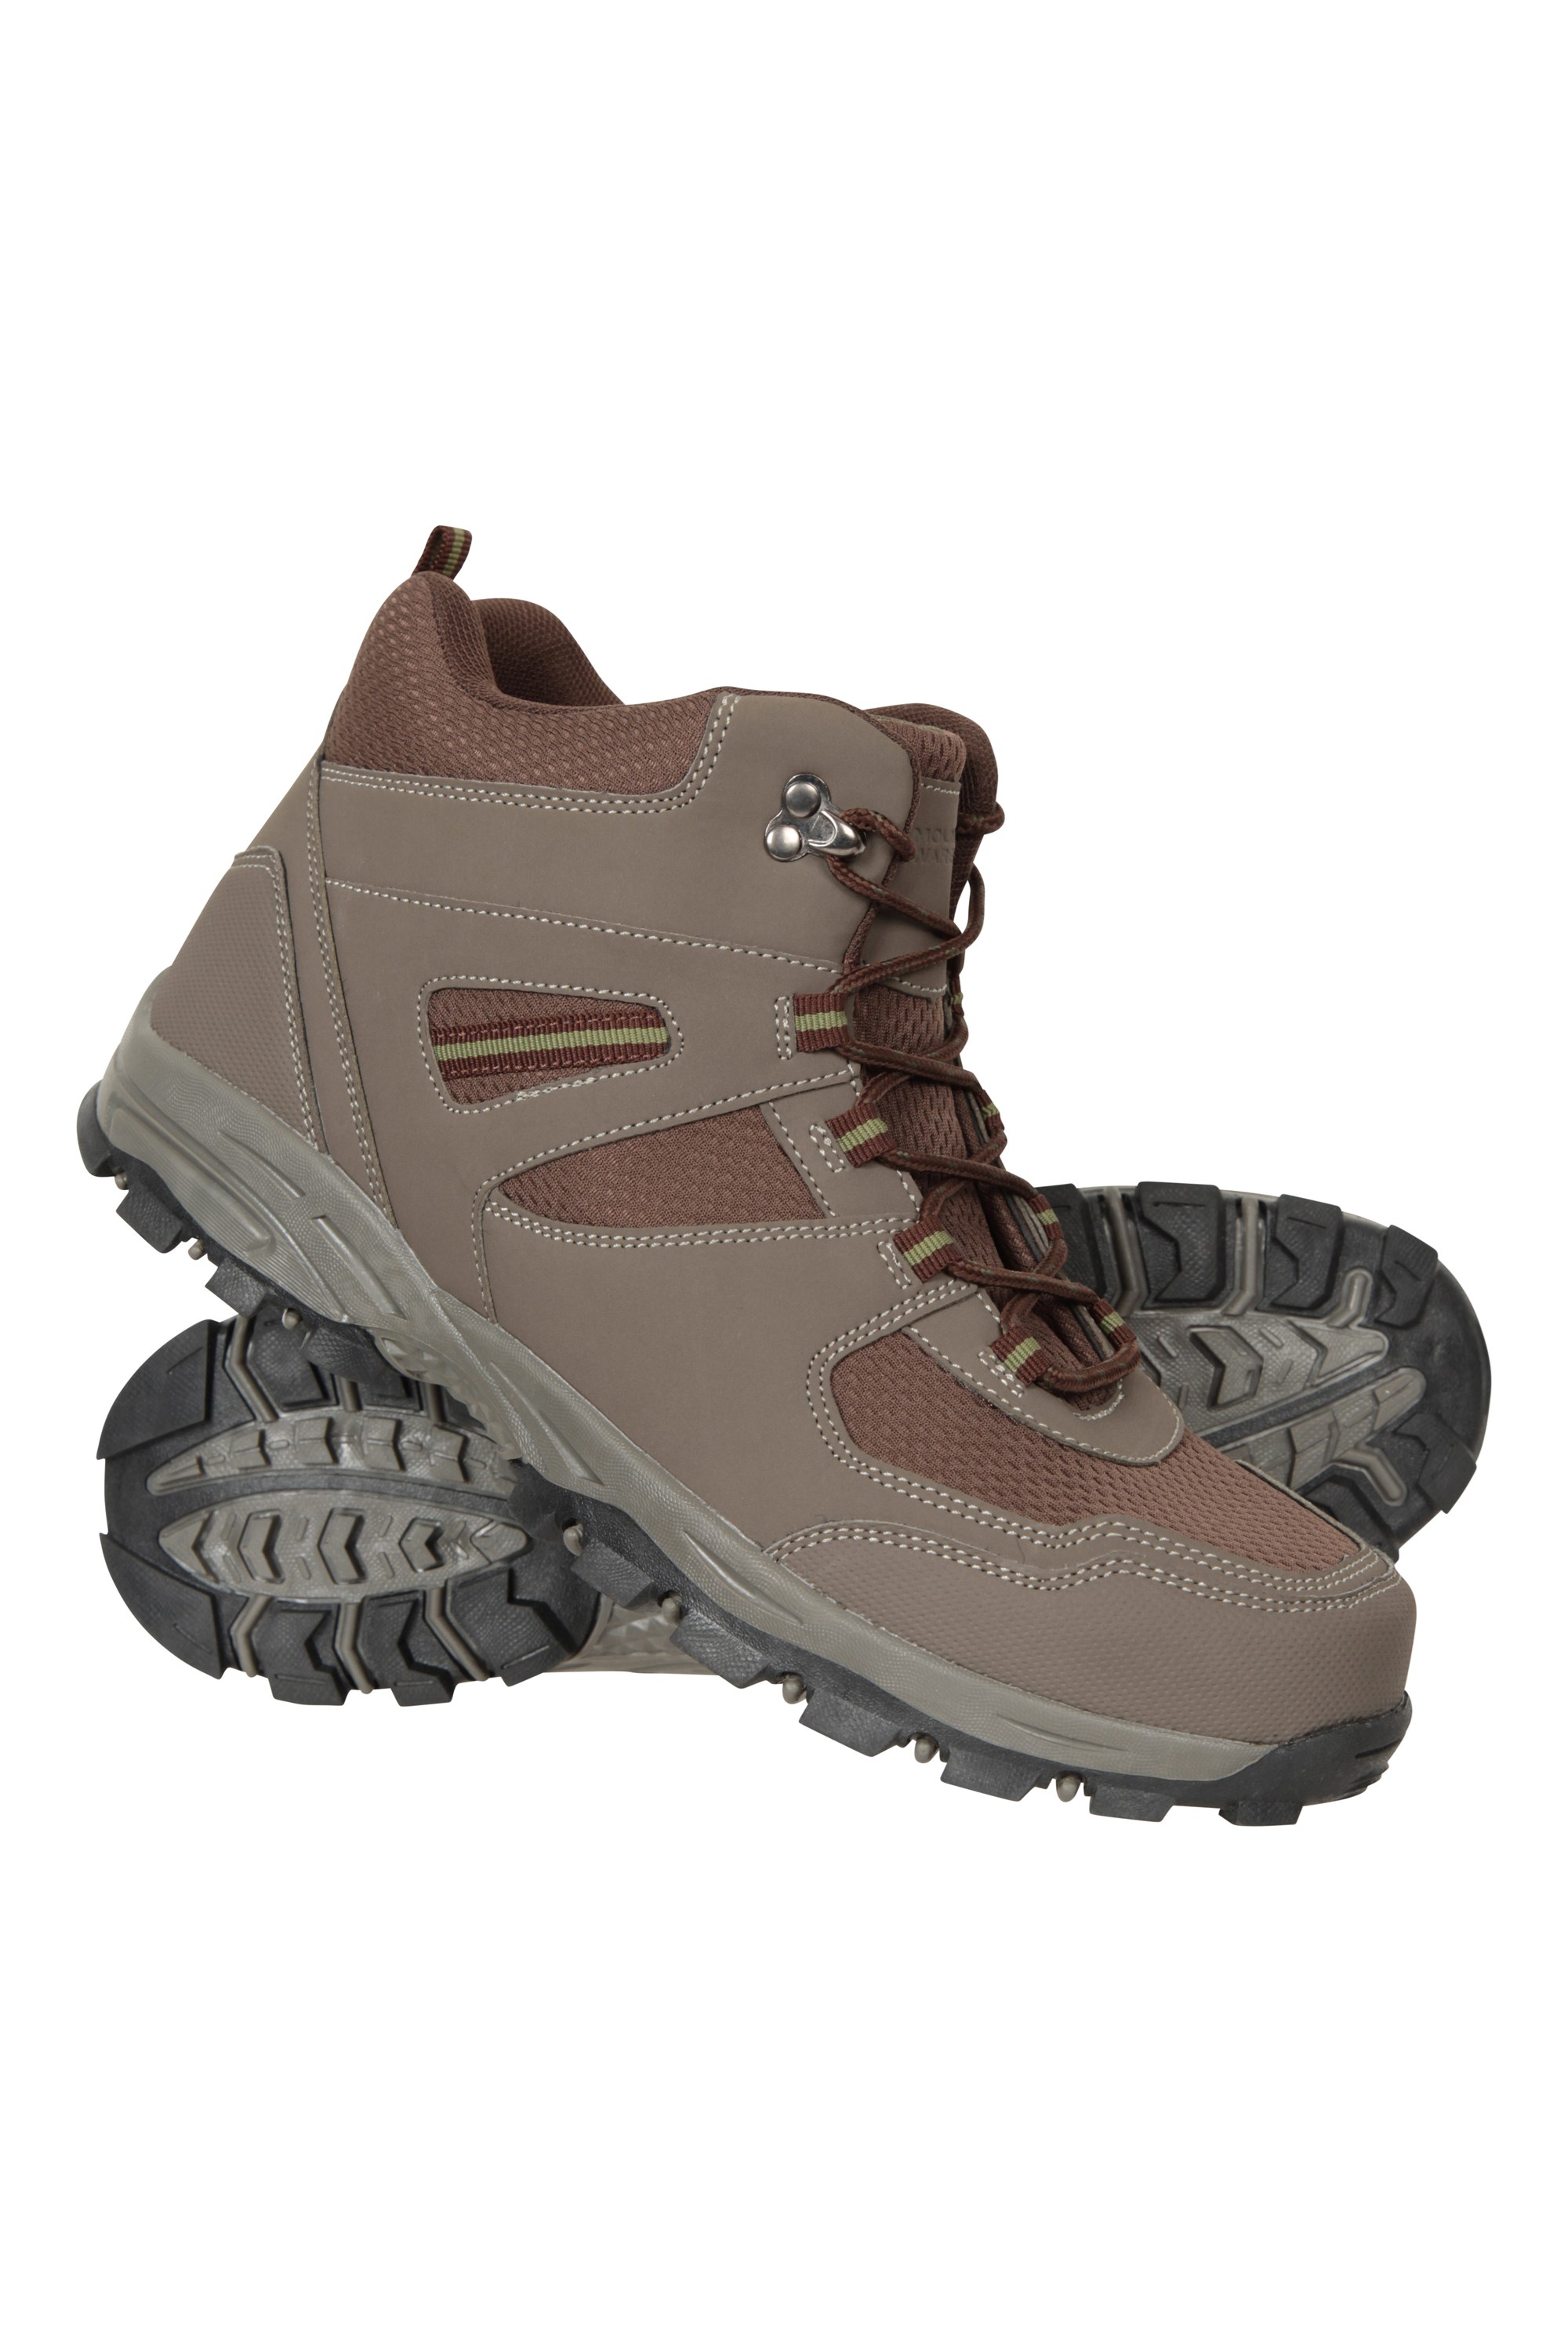 Mountain Warehouse McLeod Men's Hiking Boots Durable Breathable Walking  Shoes